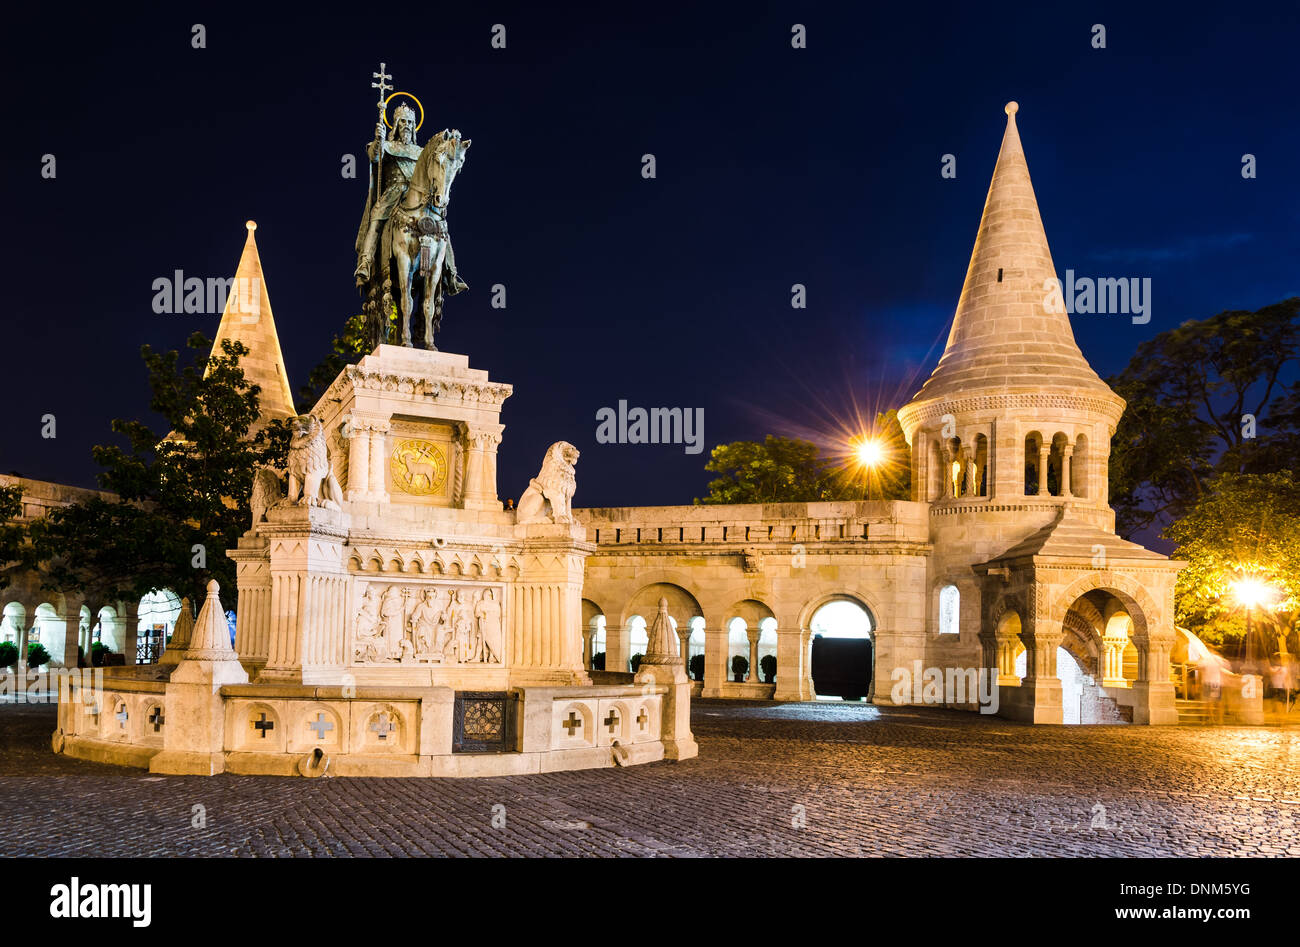 Equestrian statue and monument of Saint Stephen, erected in 1906 by architect Frigyes Schulek in Budapest, Hungary Stock Photo